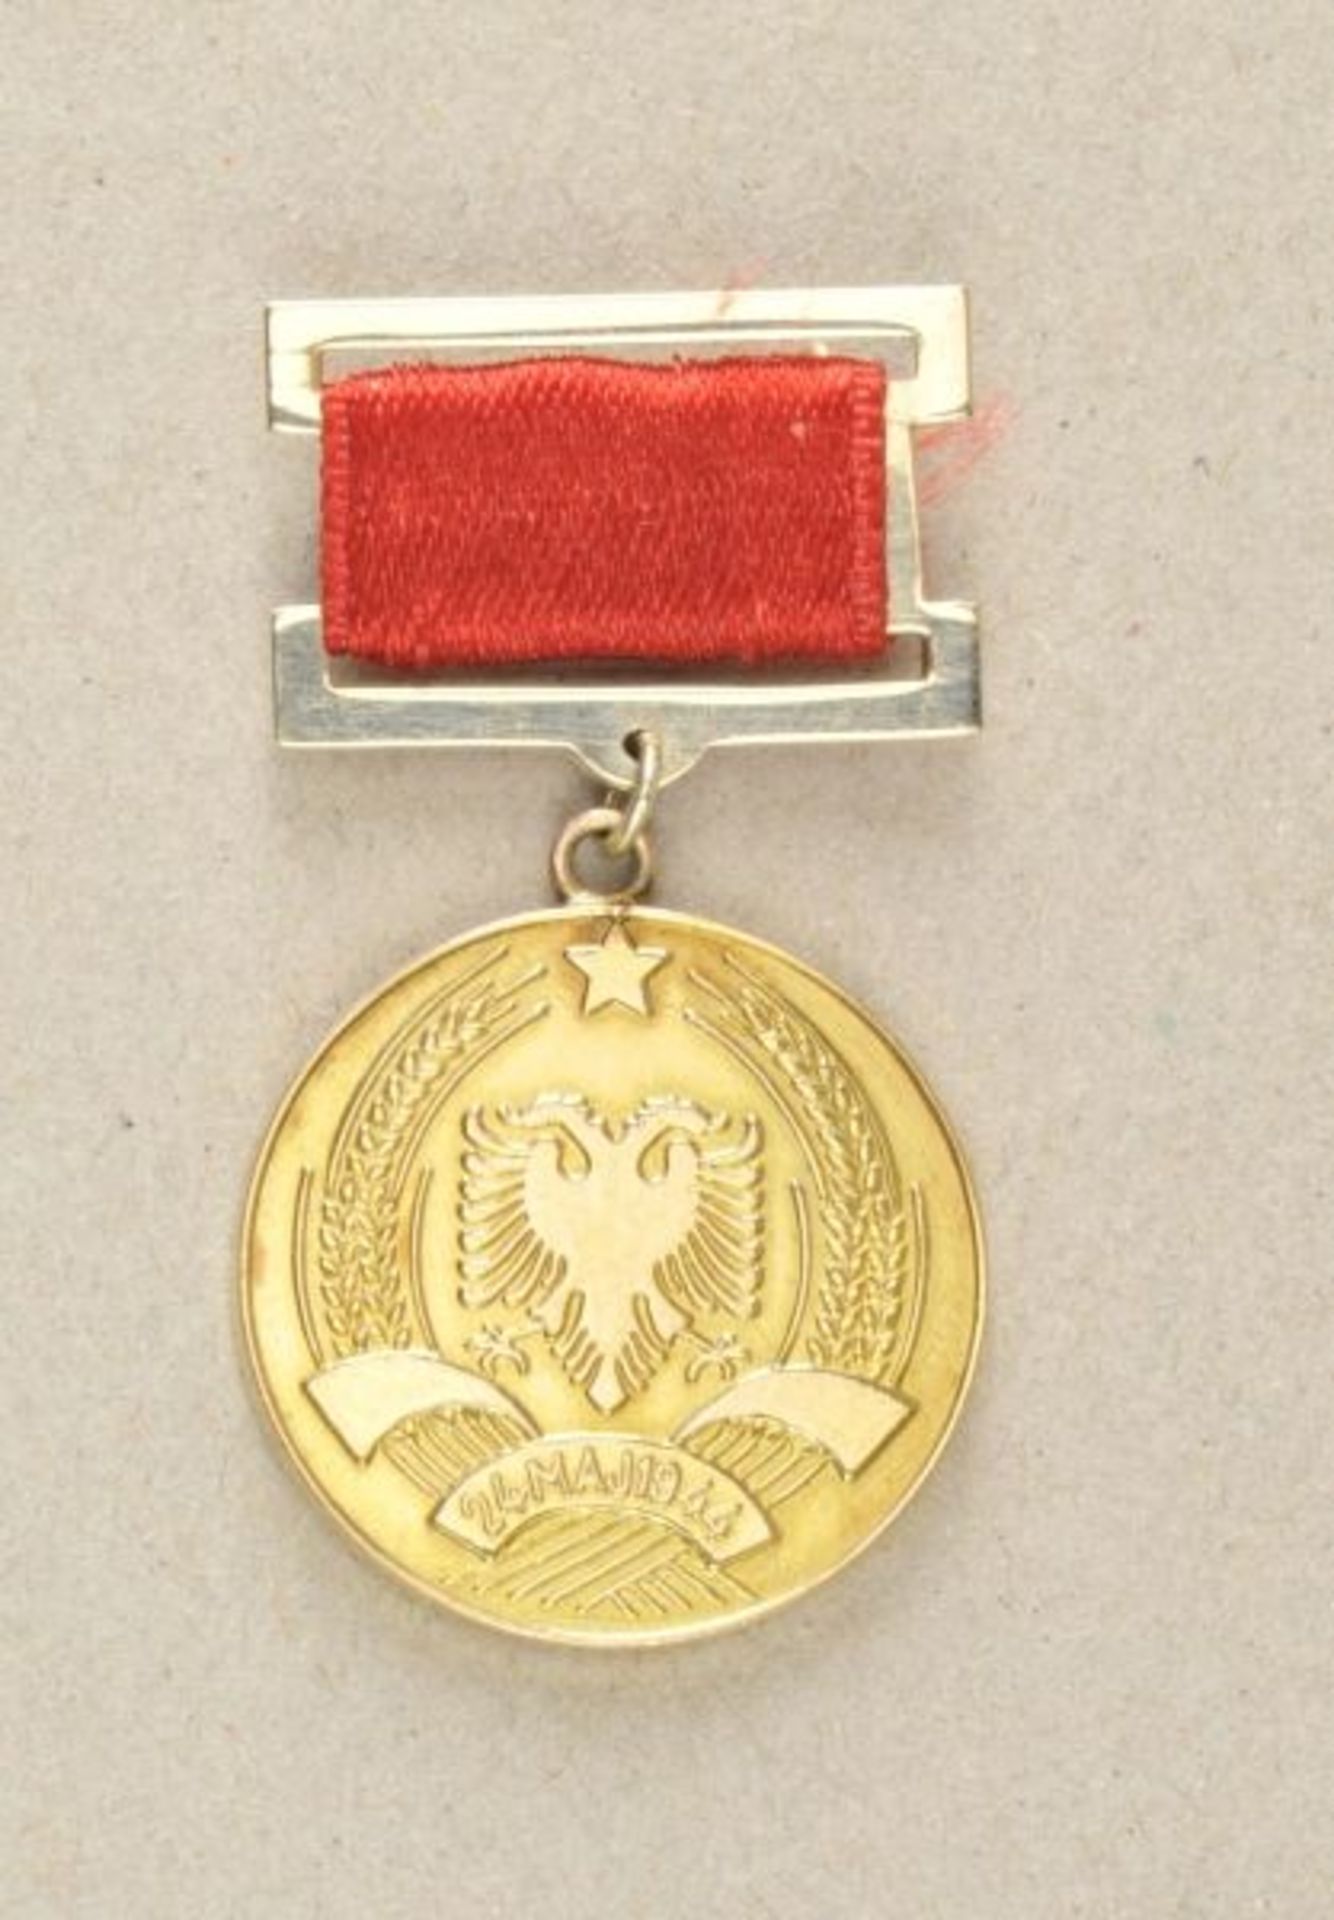 Albania  National prize, 1st class.  Gold, at wear clasp with ribbon. Average 26mm, 22,4g m.B.